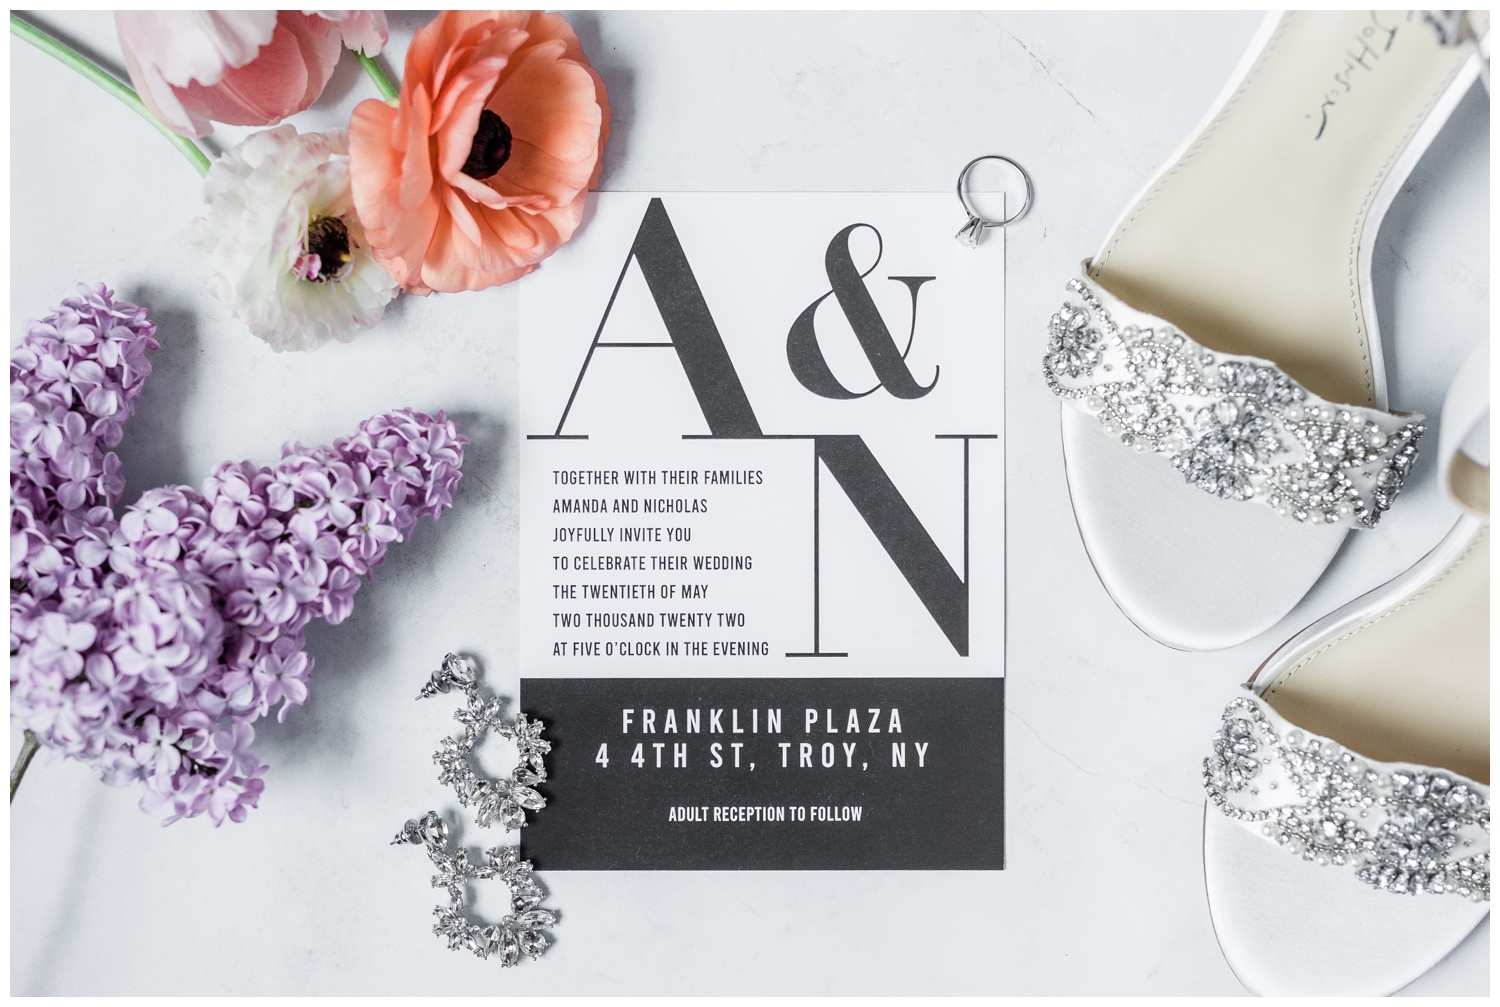 Black and white wedding invitation surrounded by bright flowers and other bridal details.